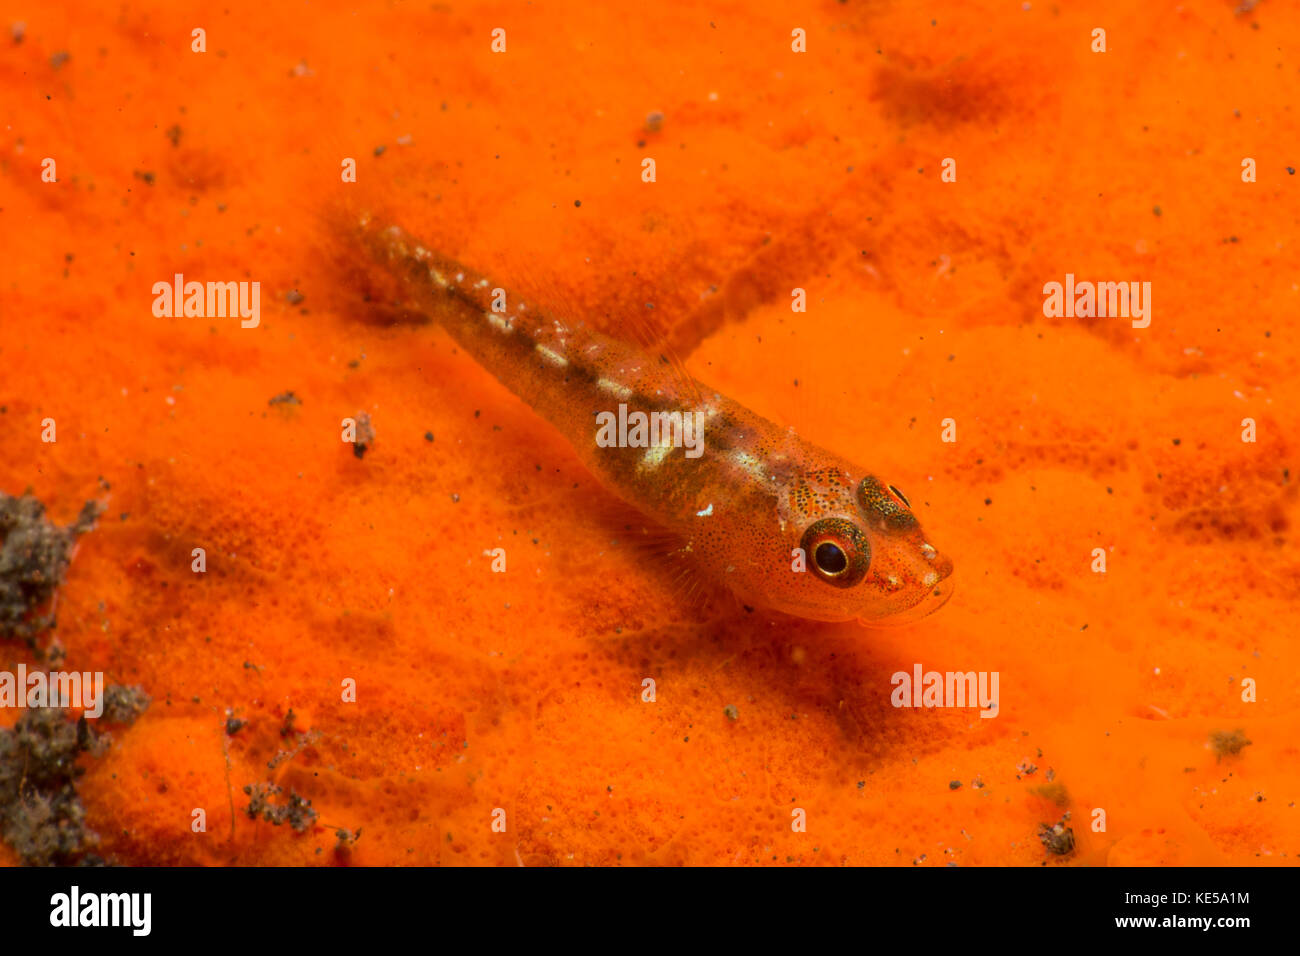 Red and transparent goby over a red encrusting sponge, Indonesia. Stock Photo